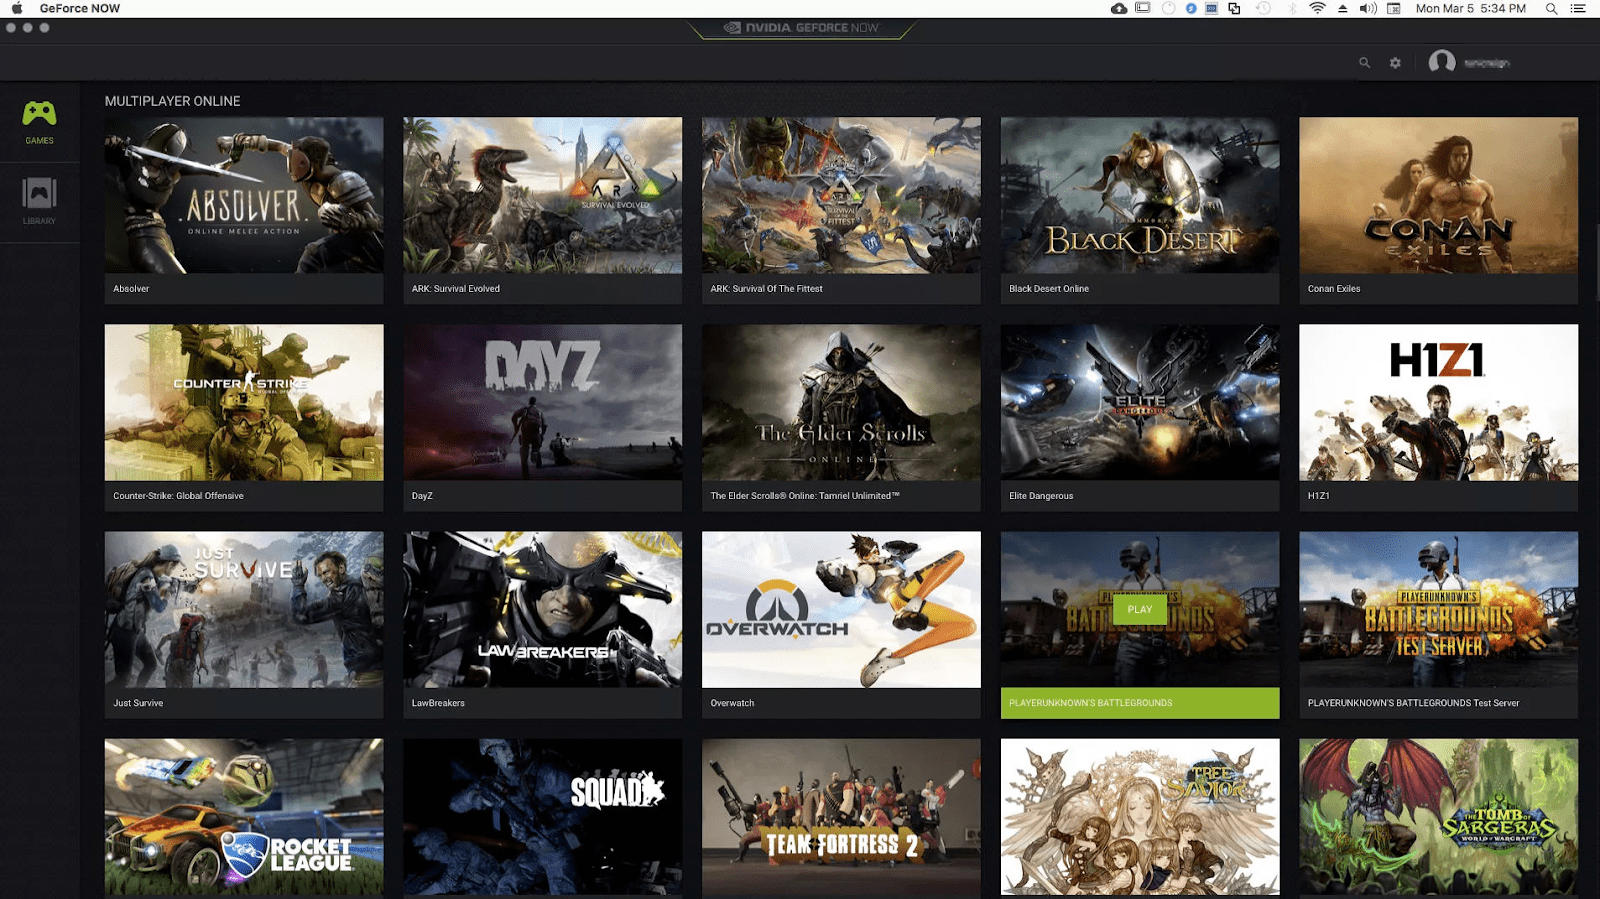 GeForce Now - Best Cloud Gaming Services